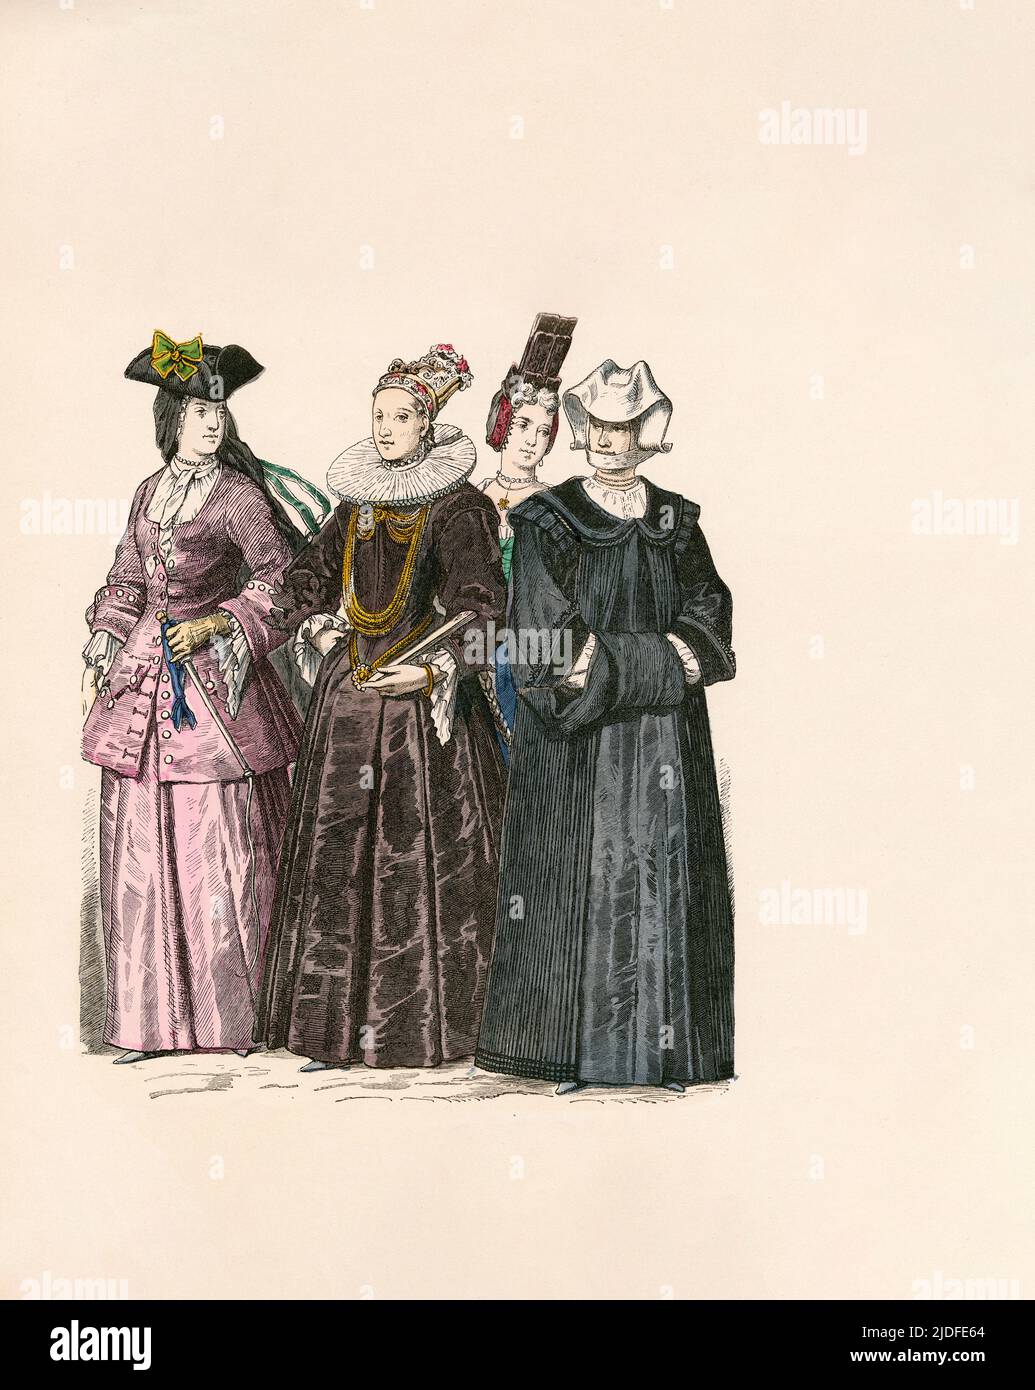 Riding Attire, also Worn at Weddings, Festive Middle-Class Women's Attire, Girl's and Women's Visiting Dress, Switzerland (city of Zurich), Early 18th Century, Illustration, The History of Costume, Braun & Schneider, Munich, Germany, 1861-1880 Stock Photo